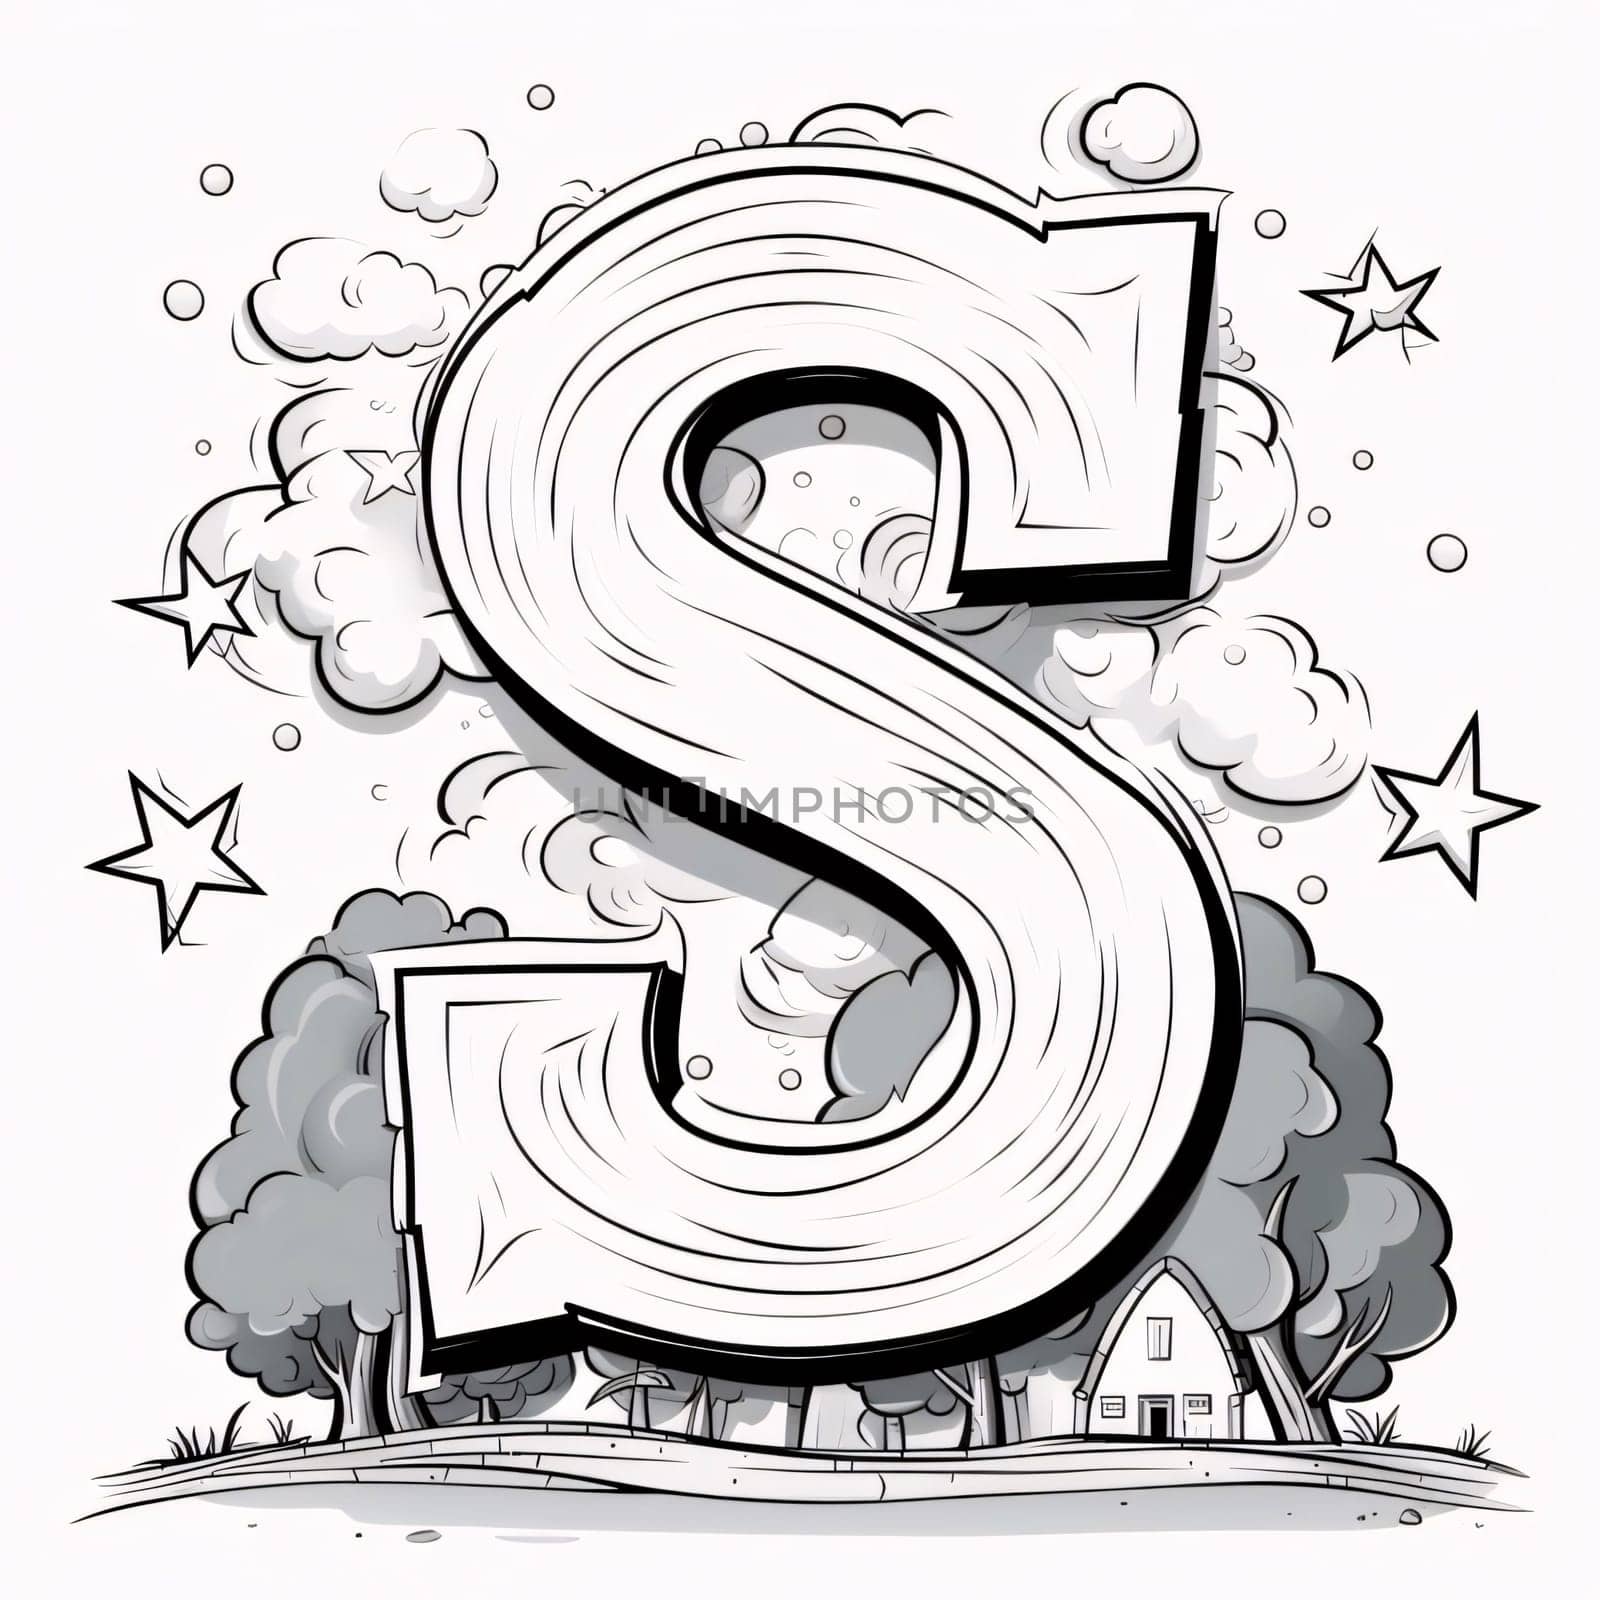 Graphic alphabet letters: Vector Cartoon Alphabet - Letter S. Black and white illustration for coloring book.